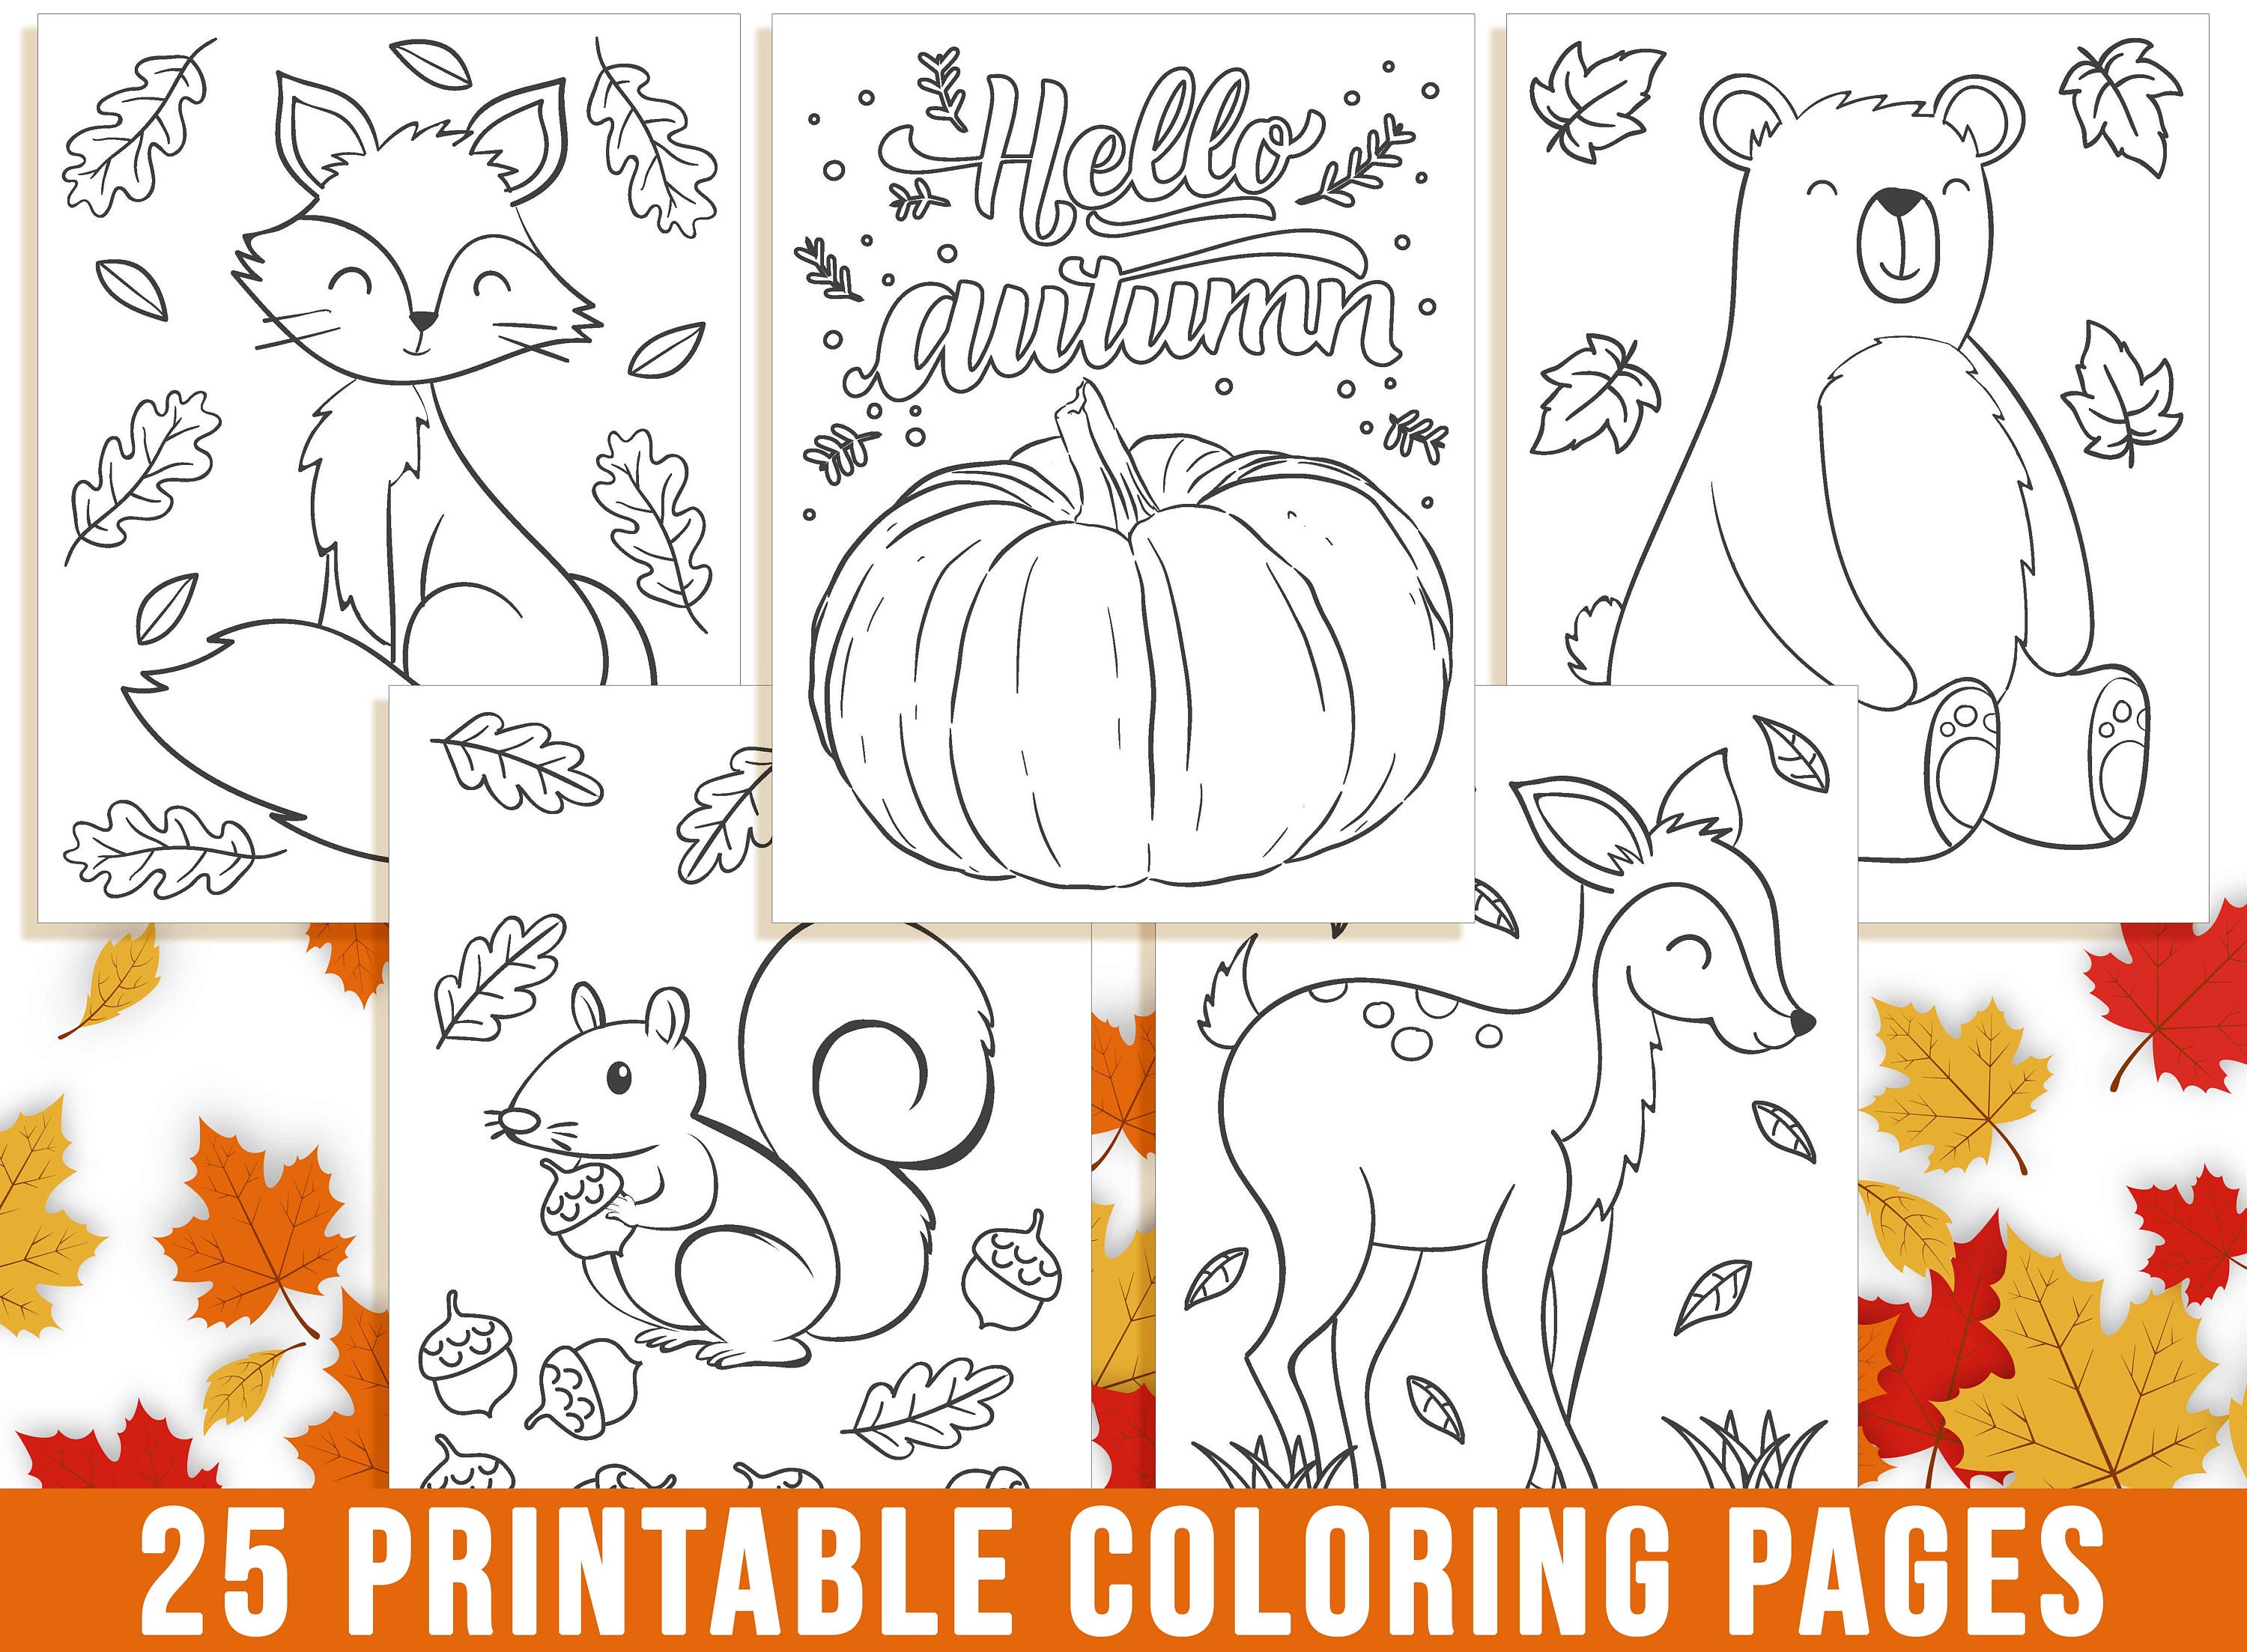 Fall coloring pages autumn coloring book for kids fall leaf fall flower pumpkin fox oak owl squirrels deer bear thanksgiving pdf